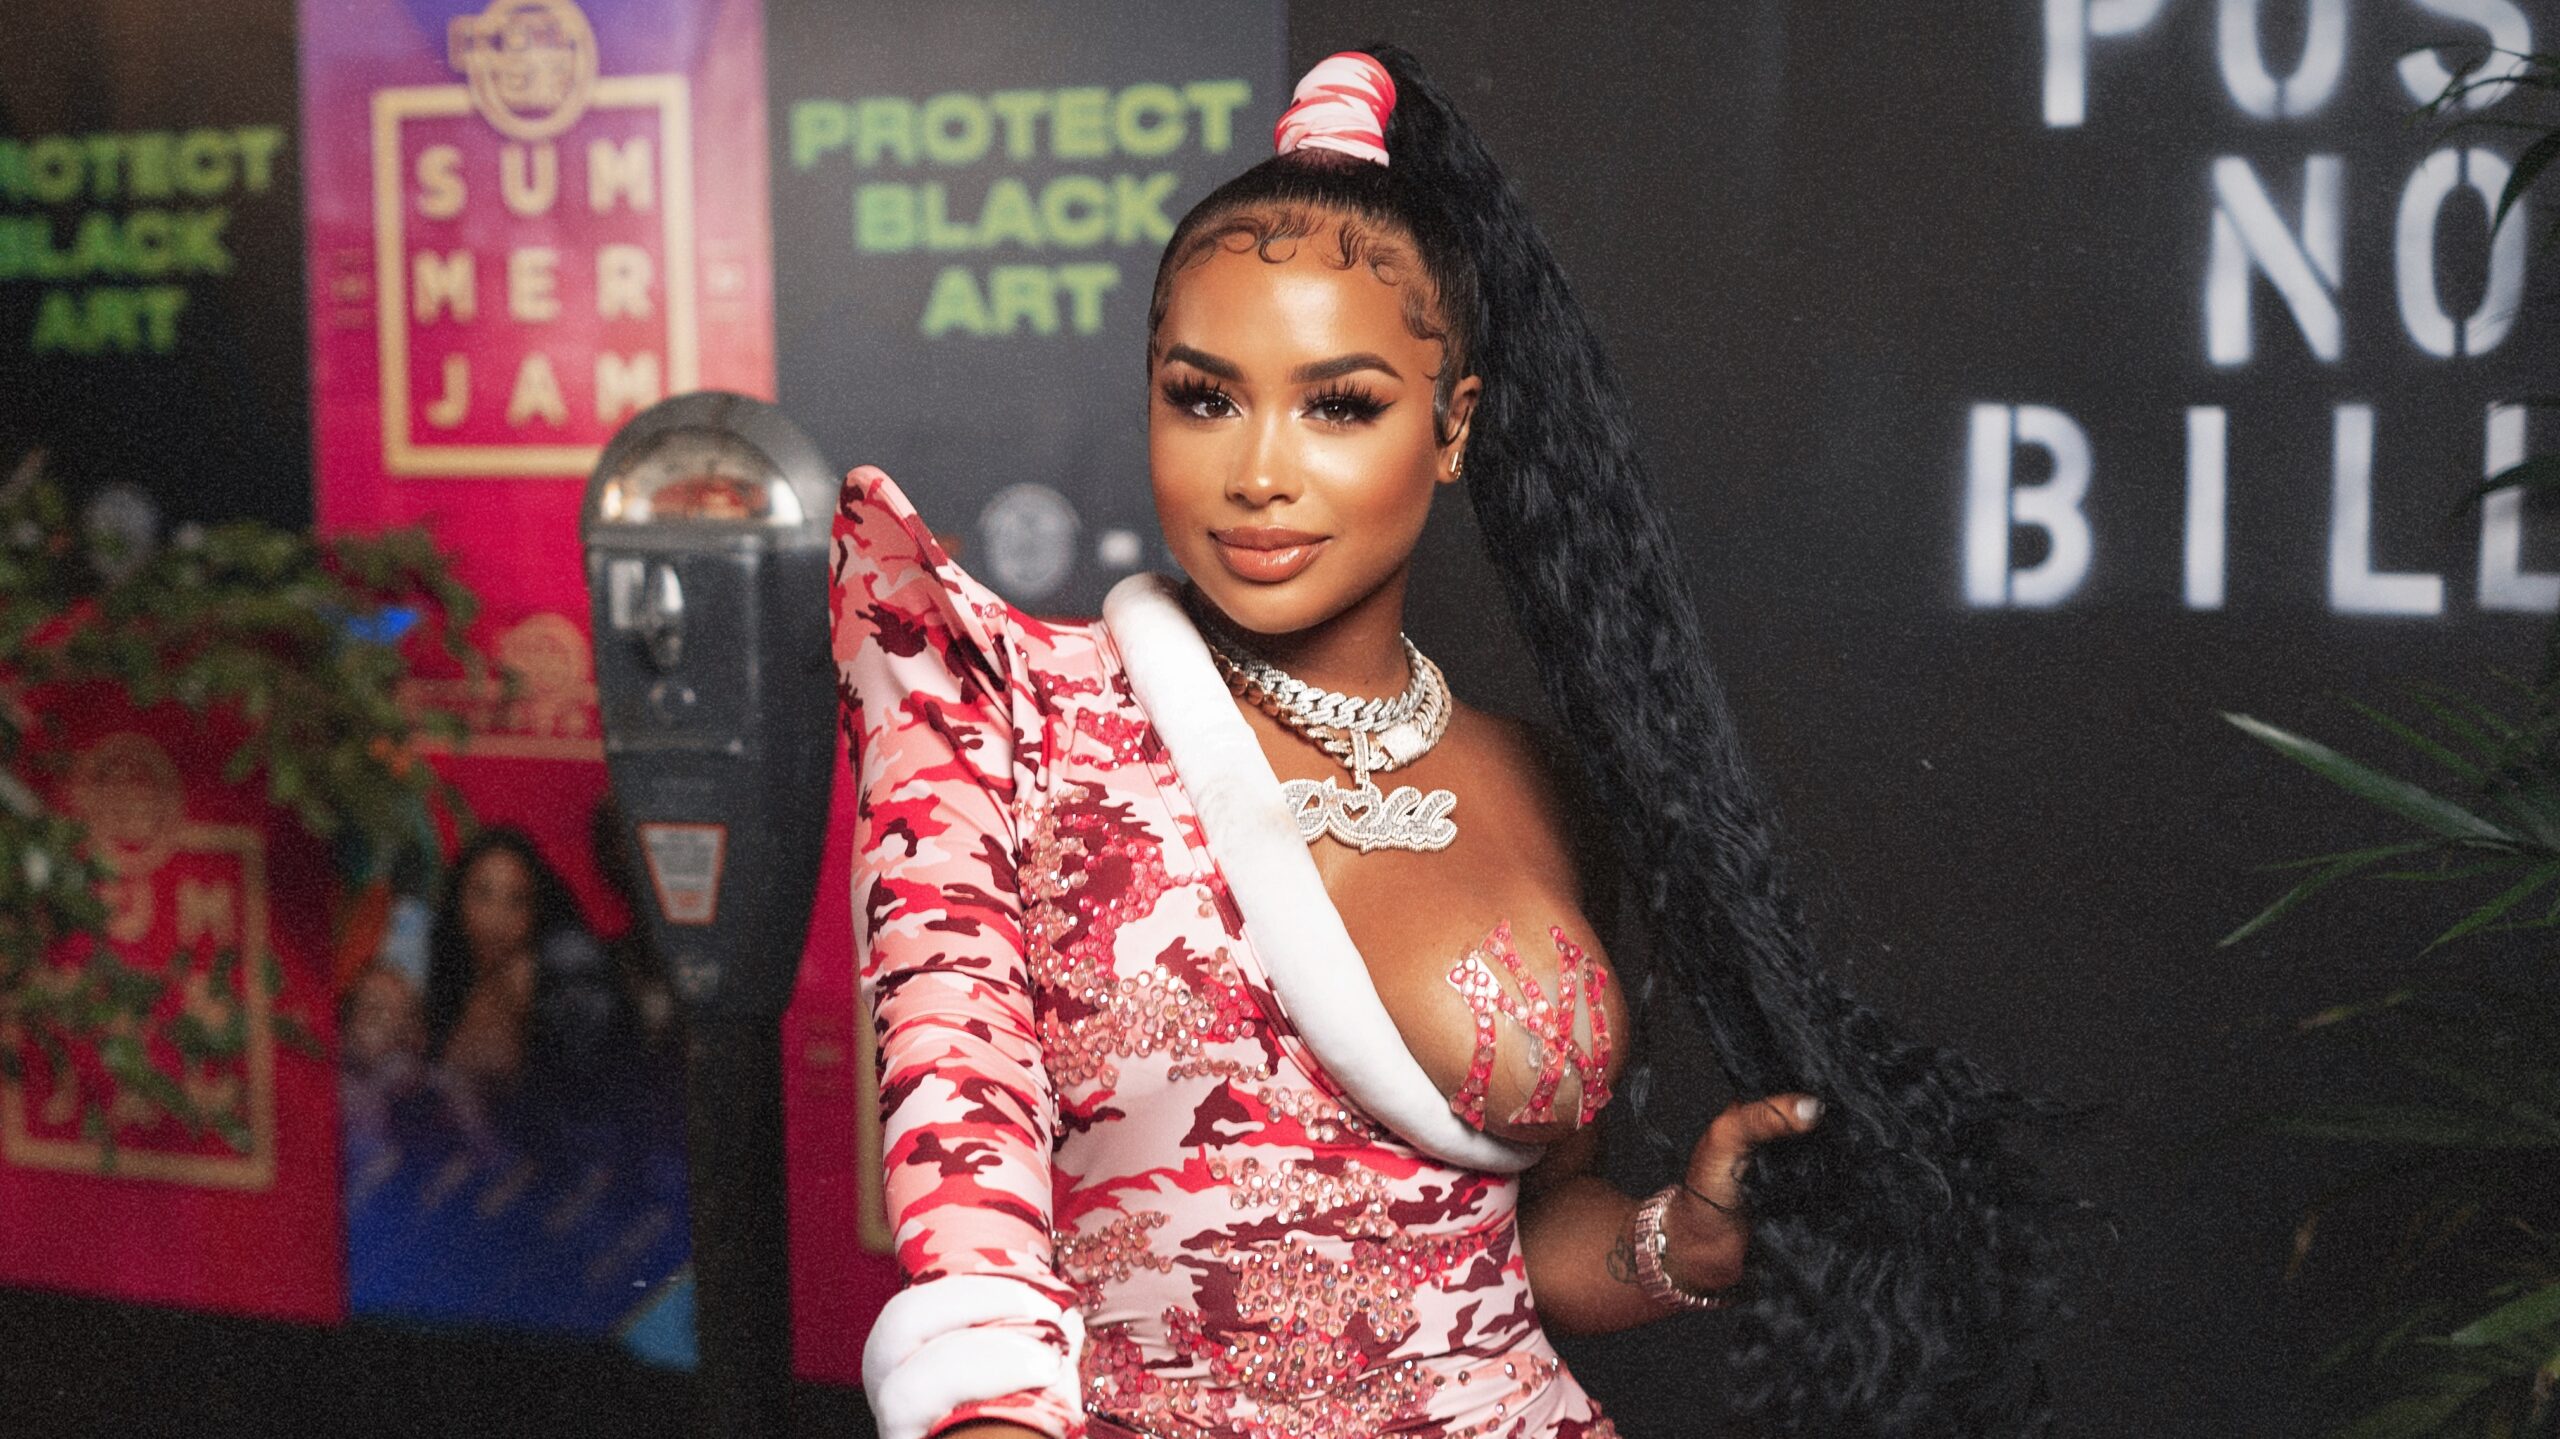 Dreamdoll Paid Homage To Lil’ Kim’s Iconic VMA’s Jumpsuit At Hot 97 Summer Jam